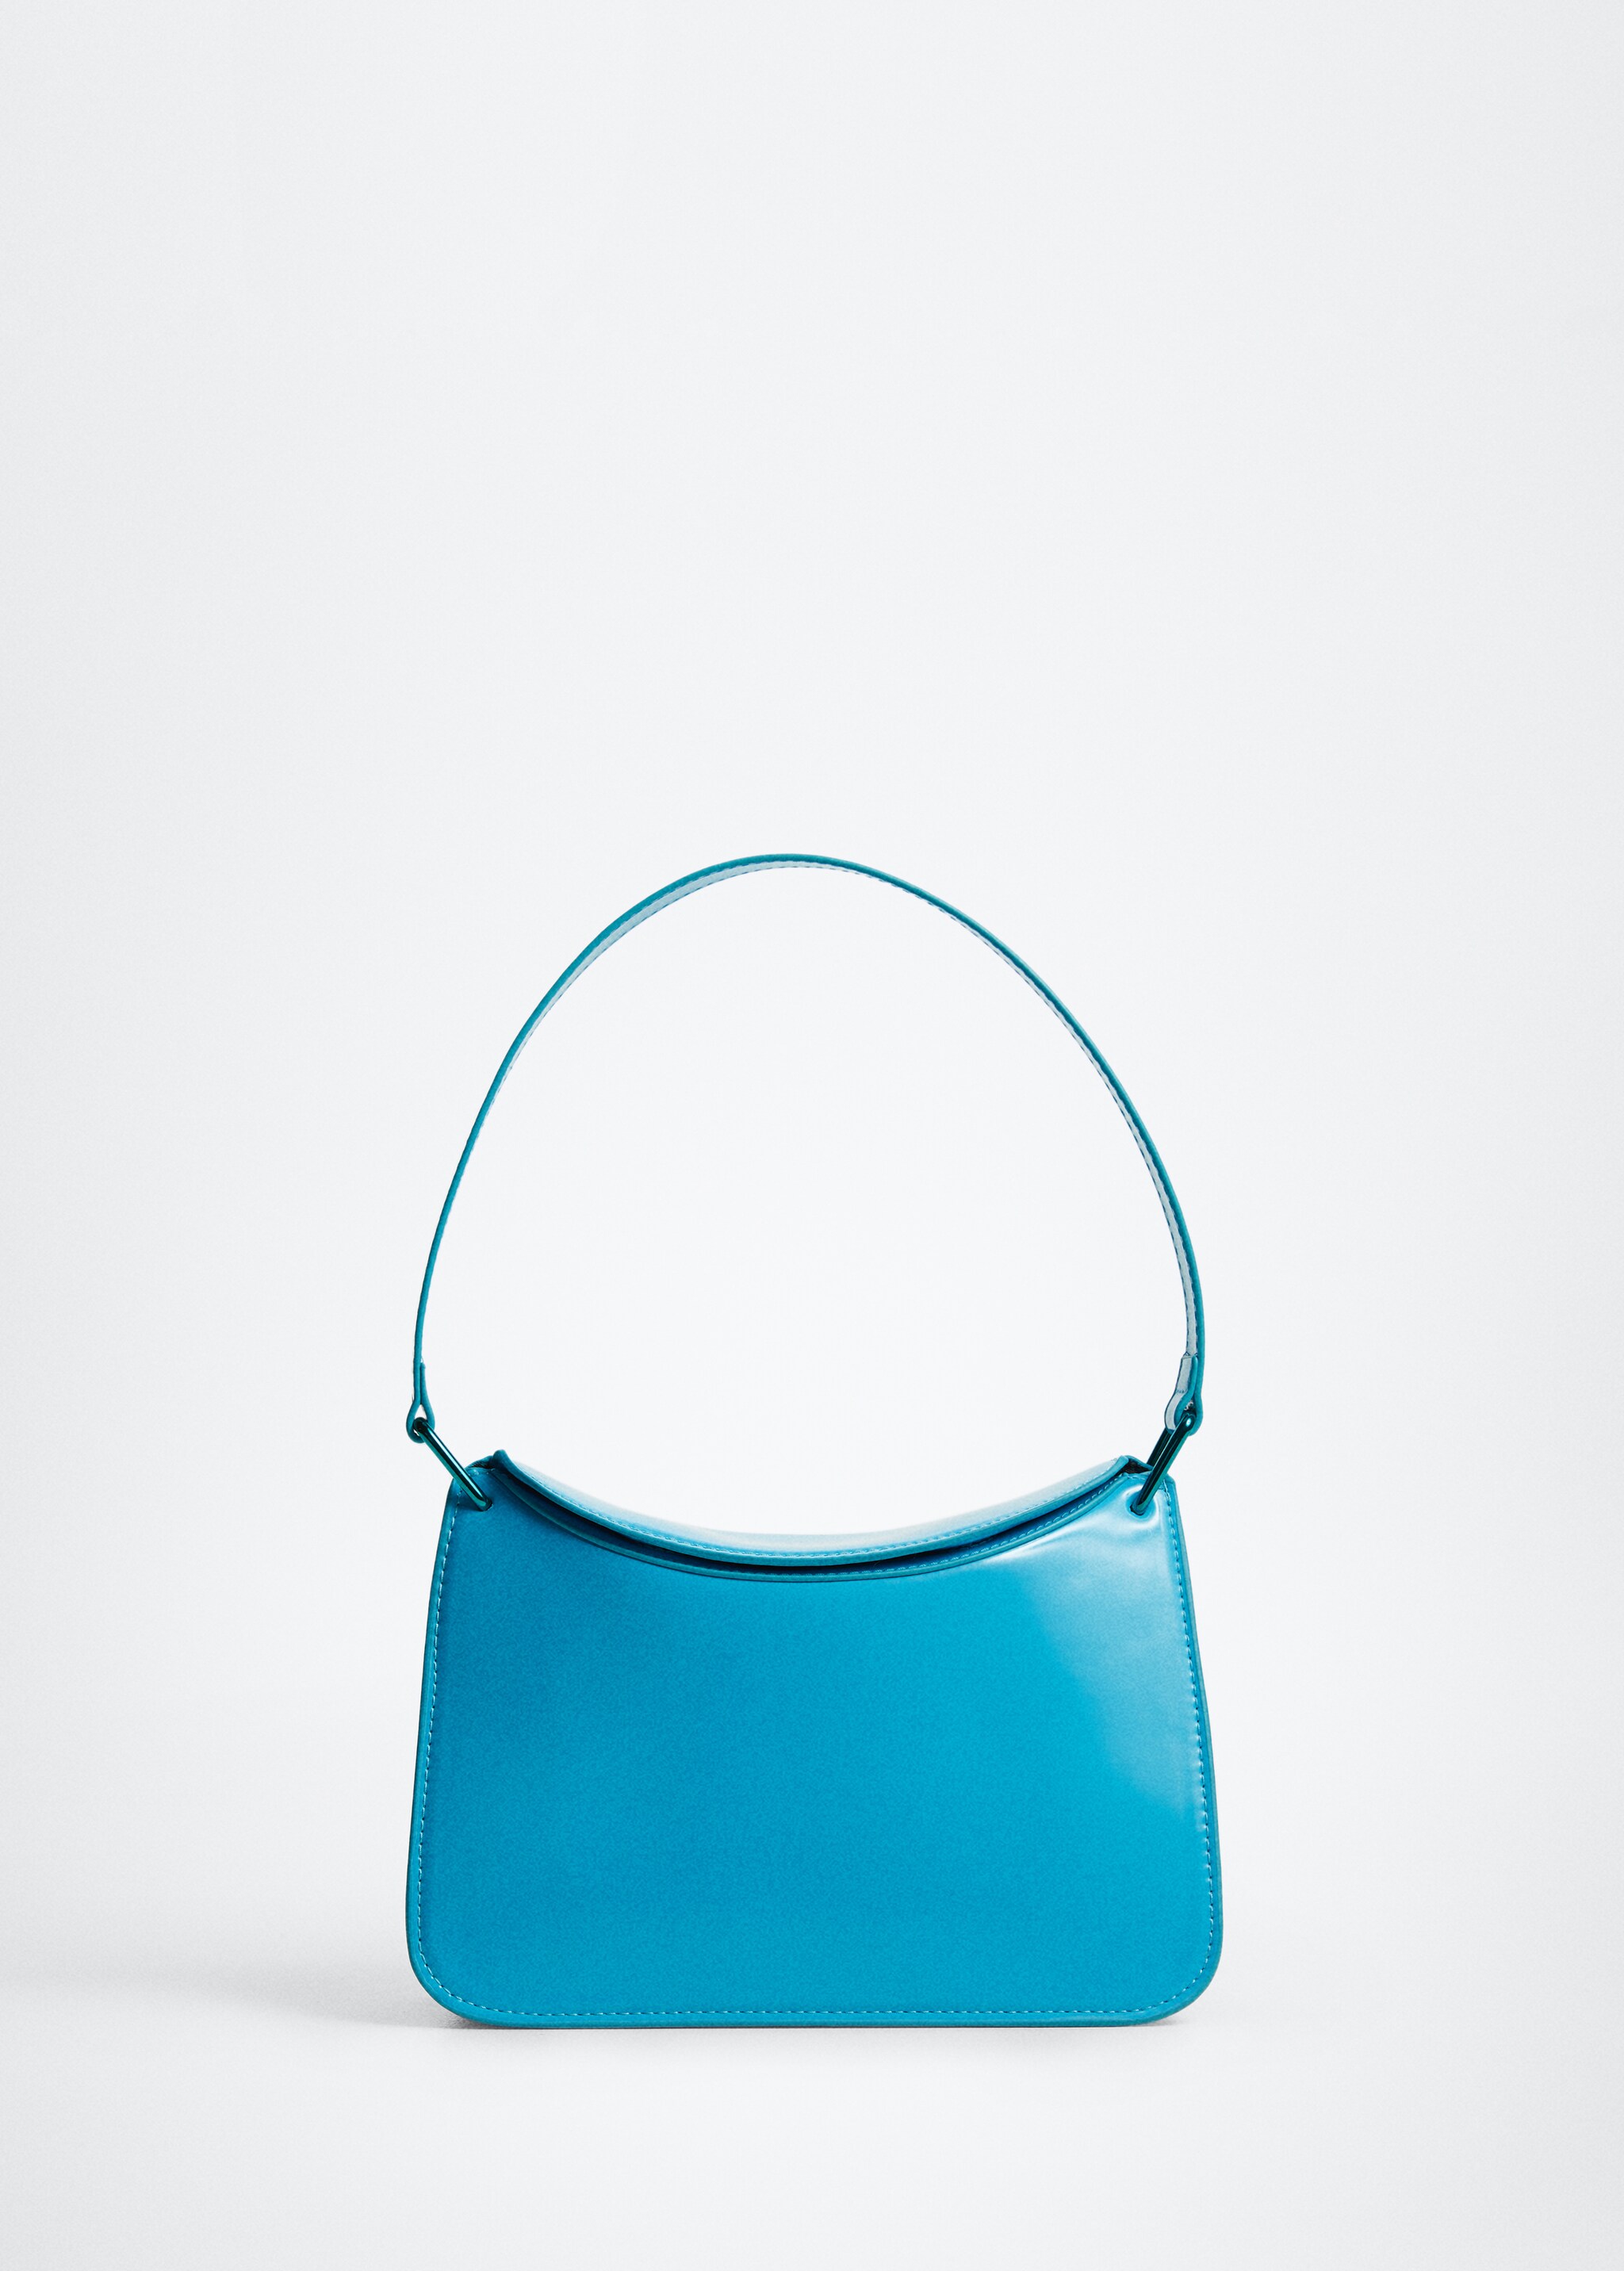 Patent leather shoulder bag - Article without model